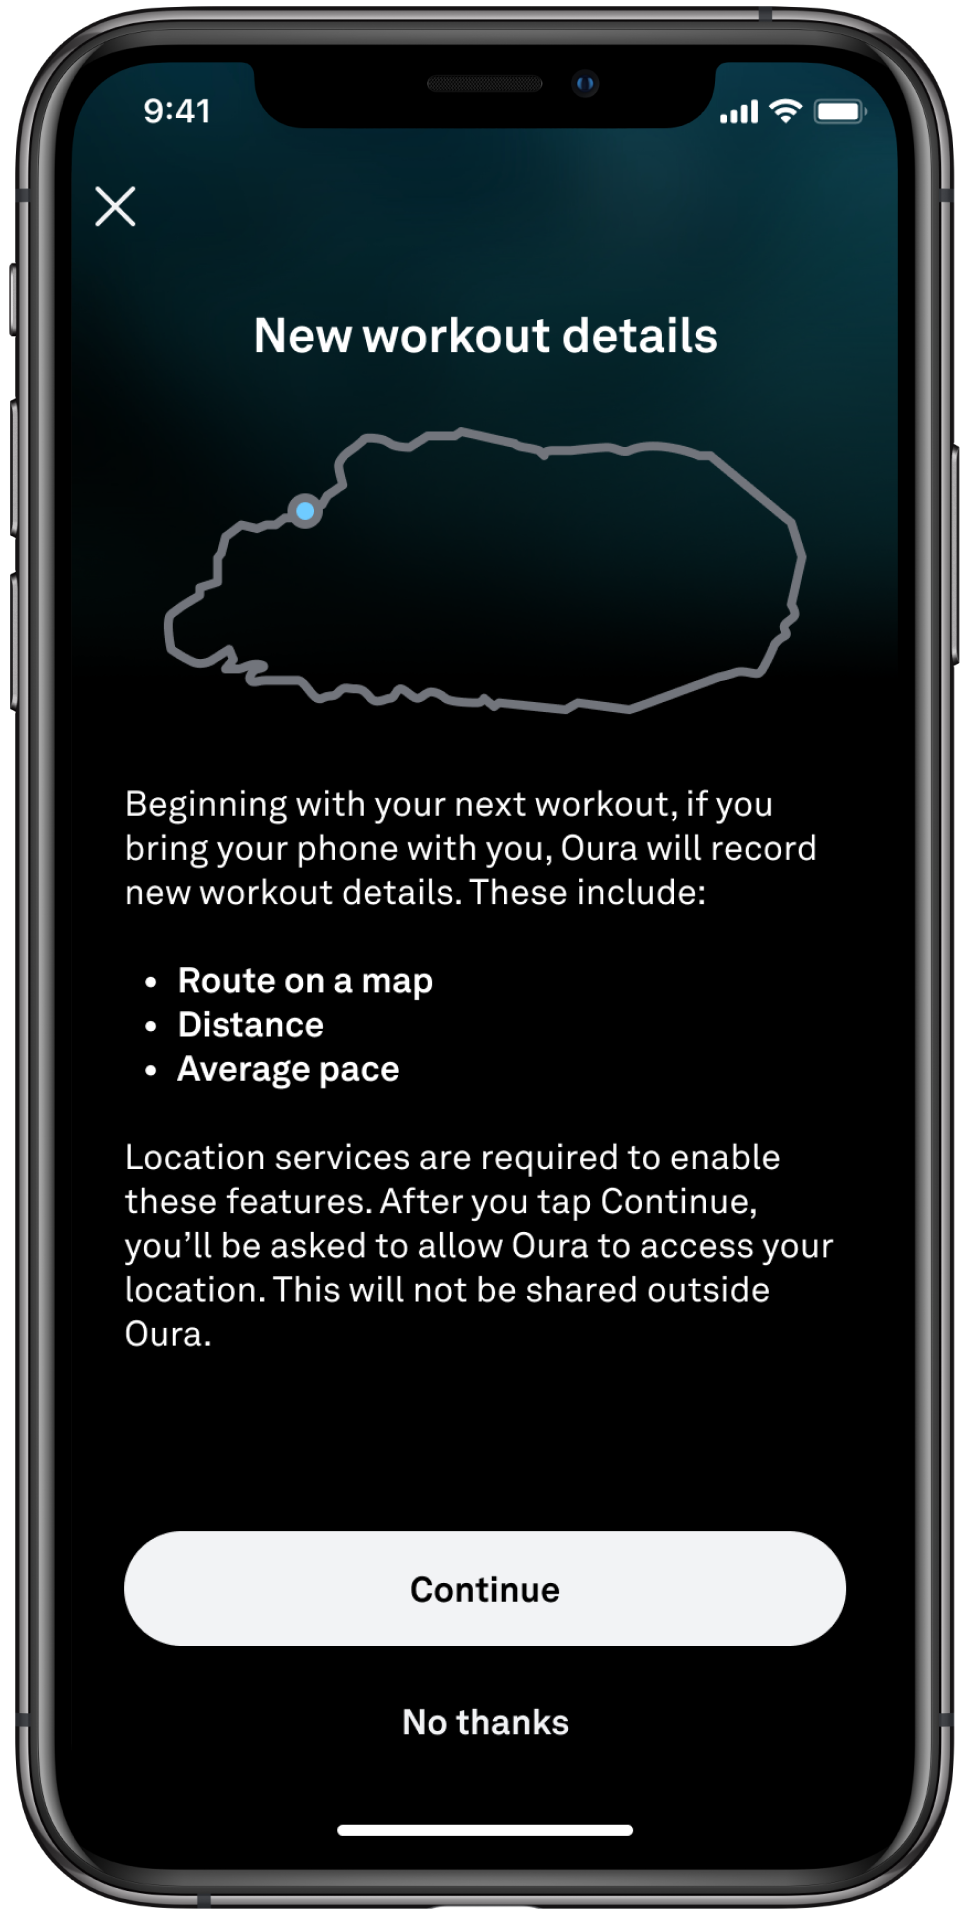 The Location for AAD information card, showing a workout route and some information about what is included with location services. There are two buttons: continue and no thanks